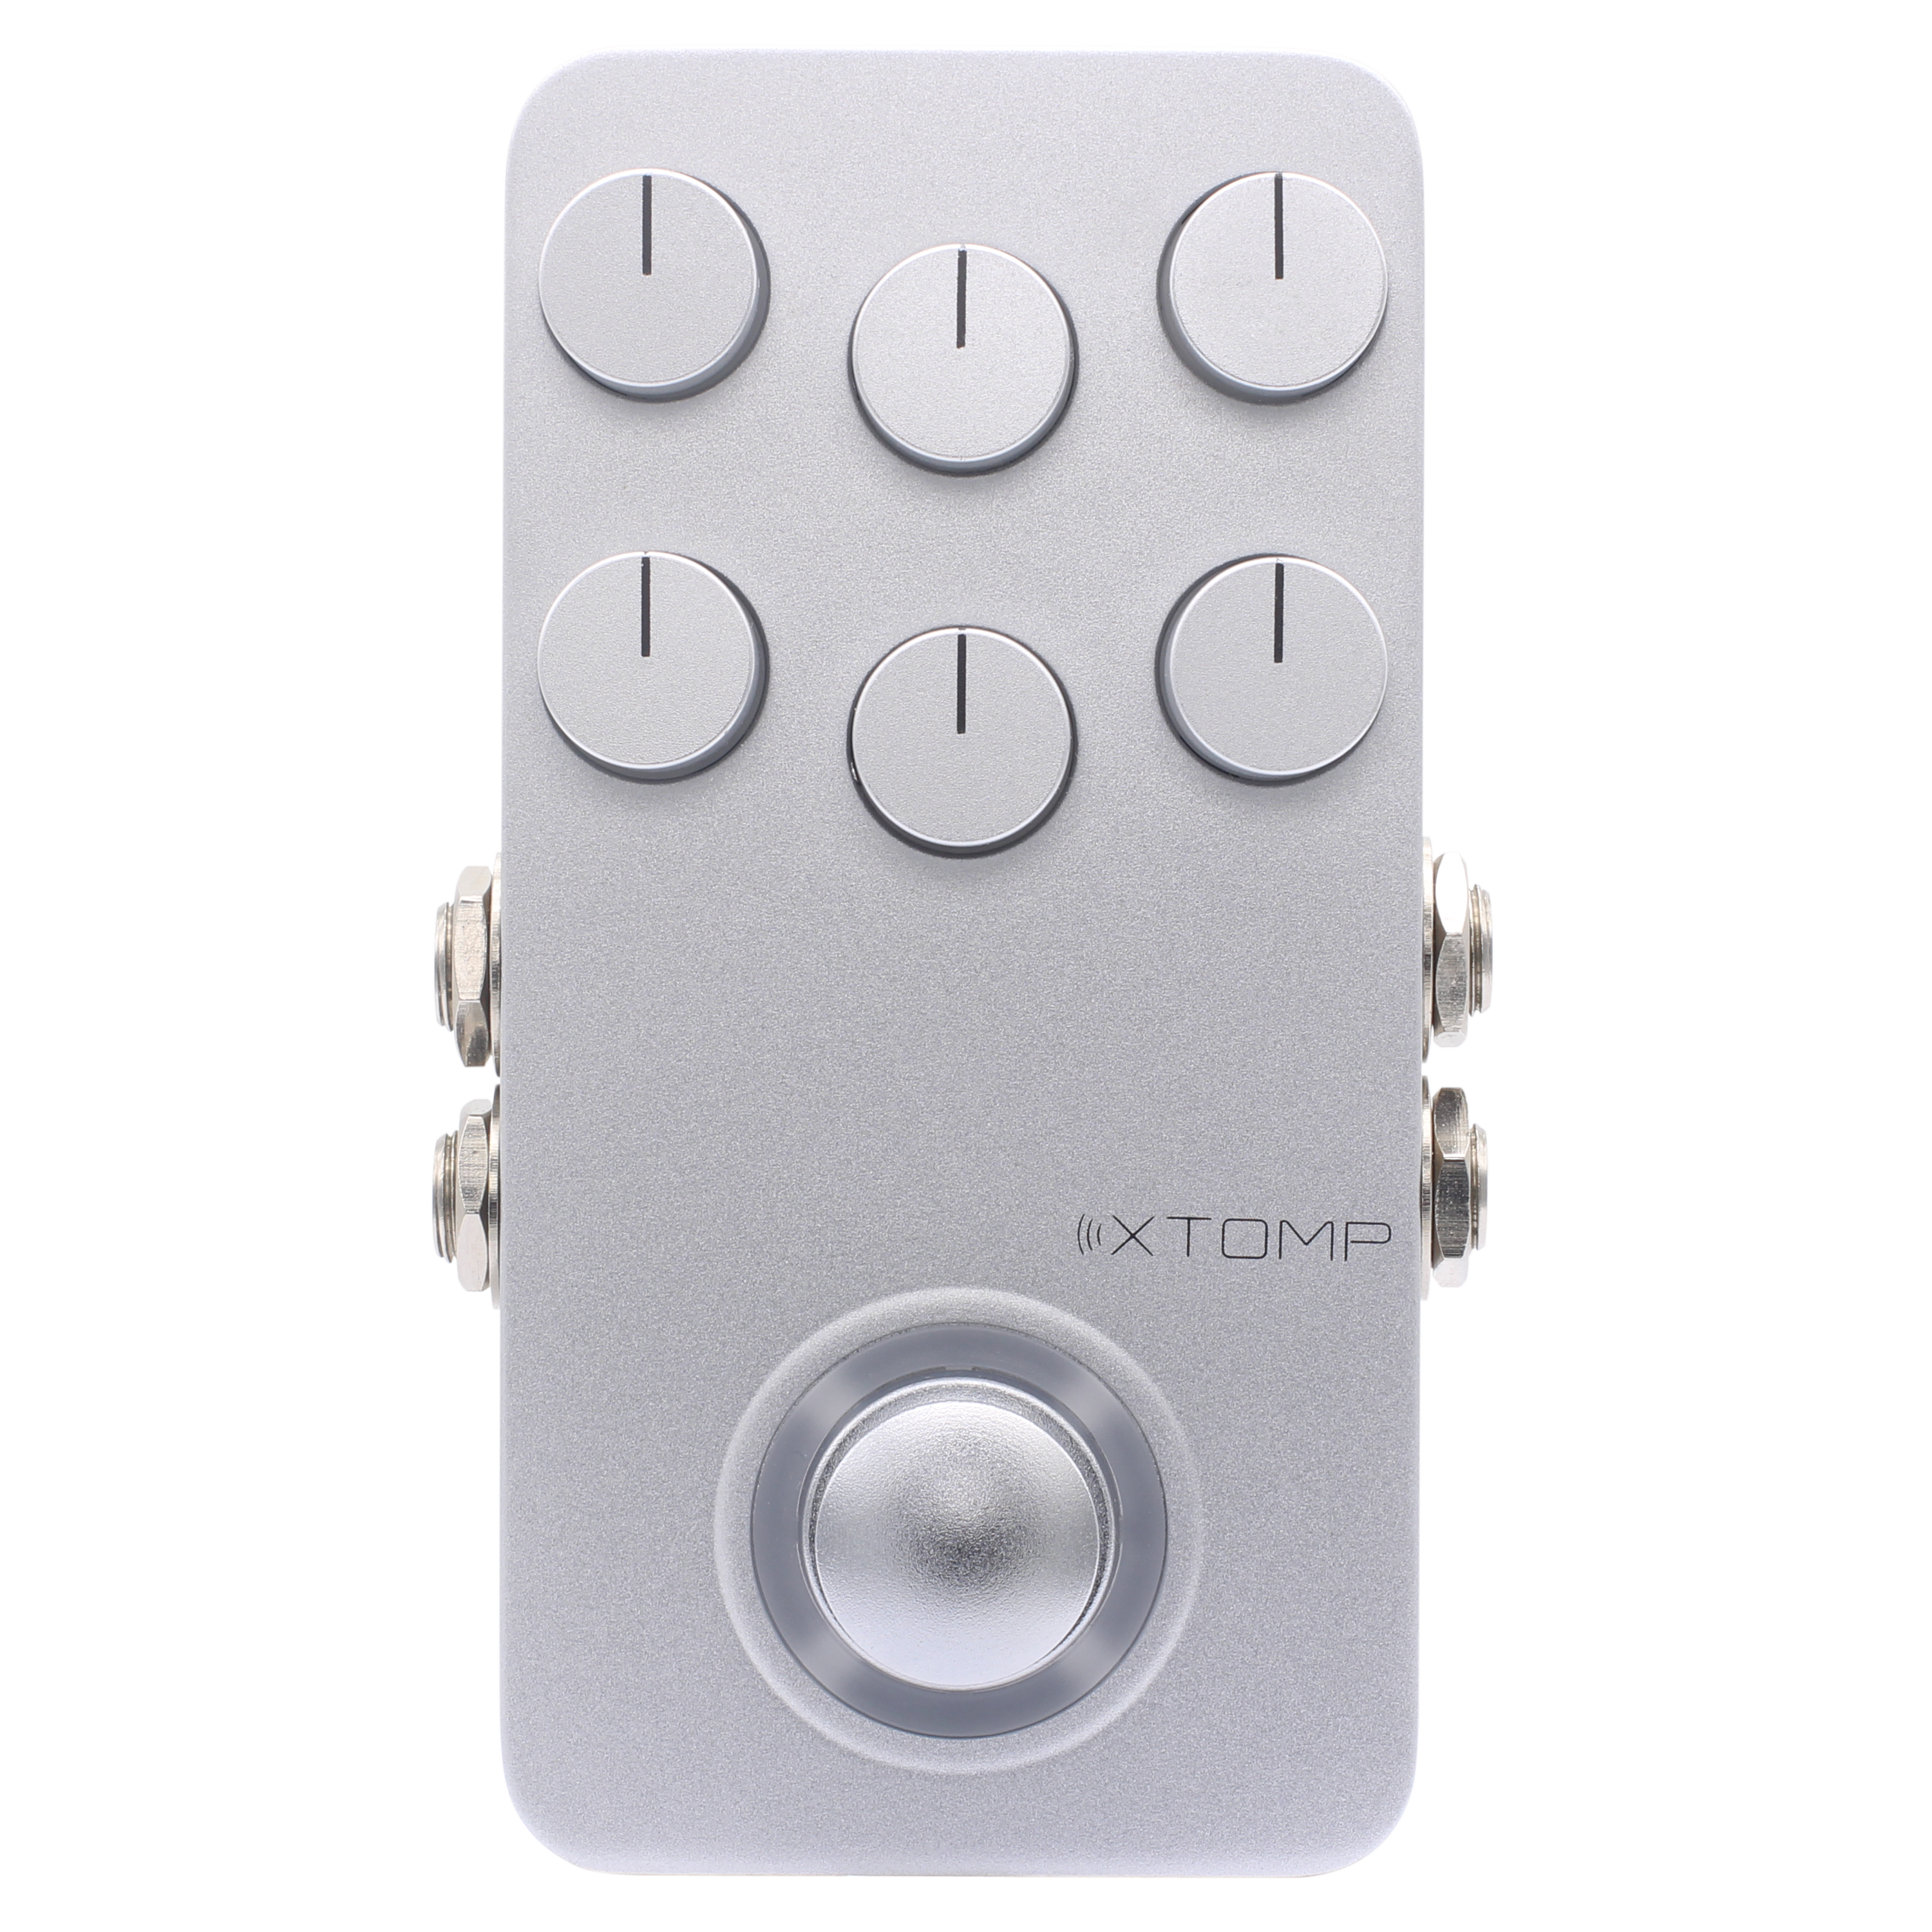 Hotone XTOMP Bluetooth Modeling Effects Pedal